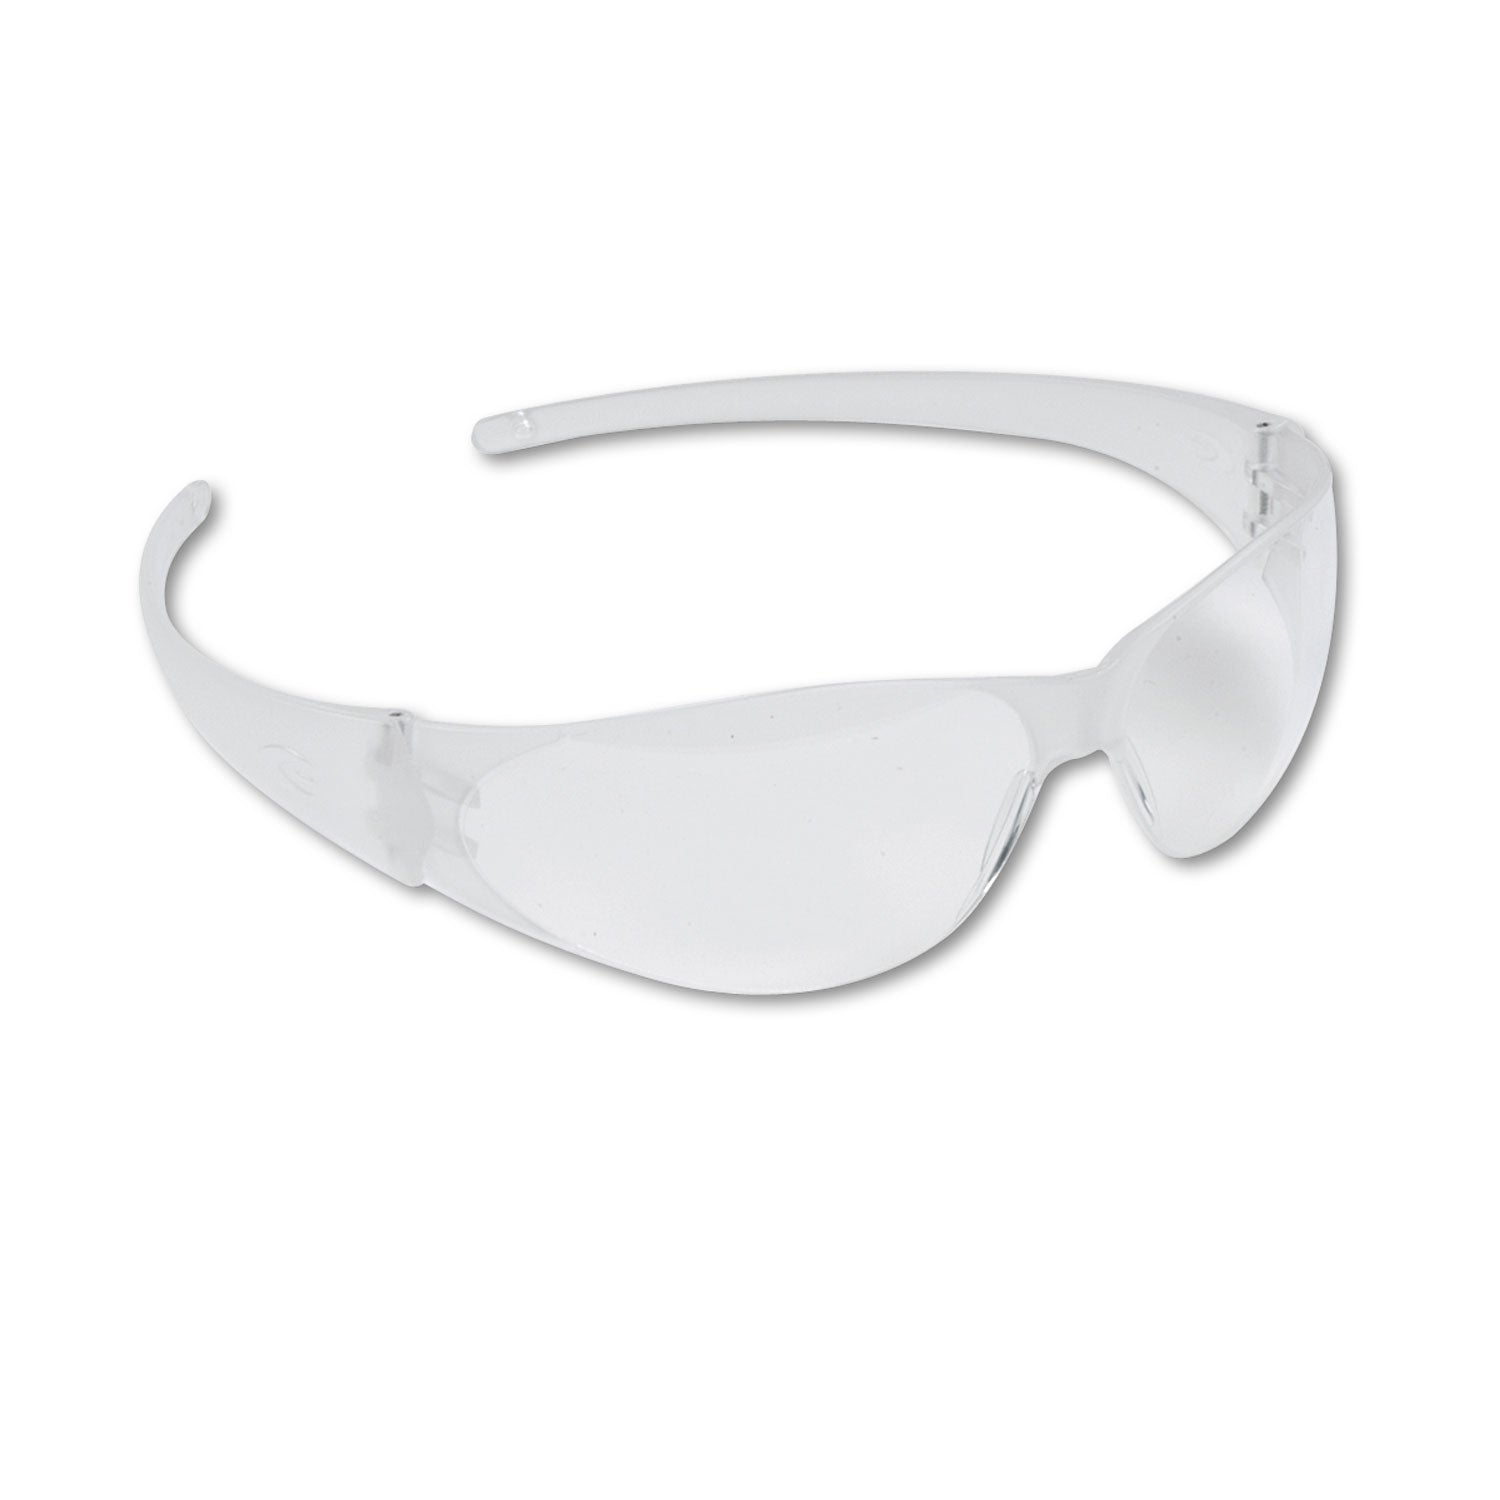 Checkmate Wraparound Safety Glasses, CLR Polycarb Frame, Uncoated CLR Lens, 12/Box - 